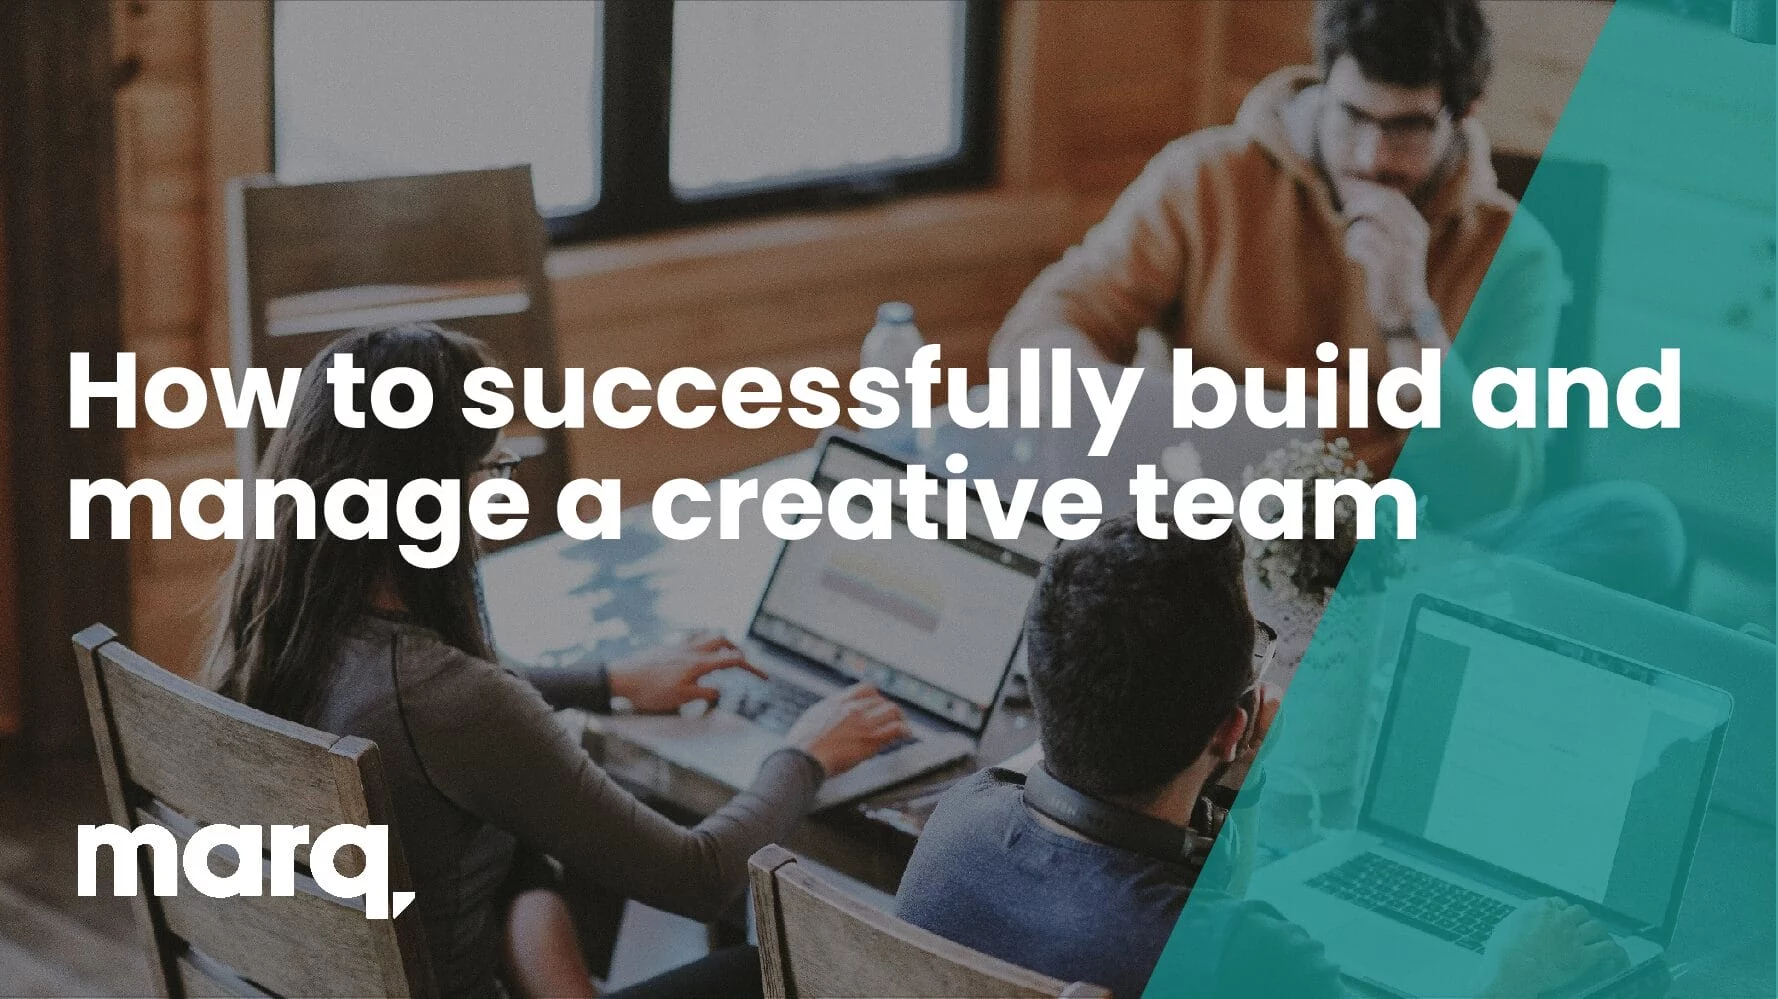 How to successfully build and manage a creative team